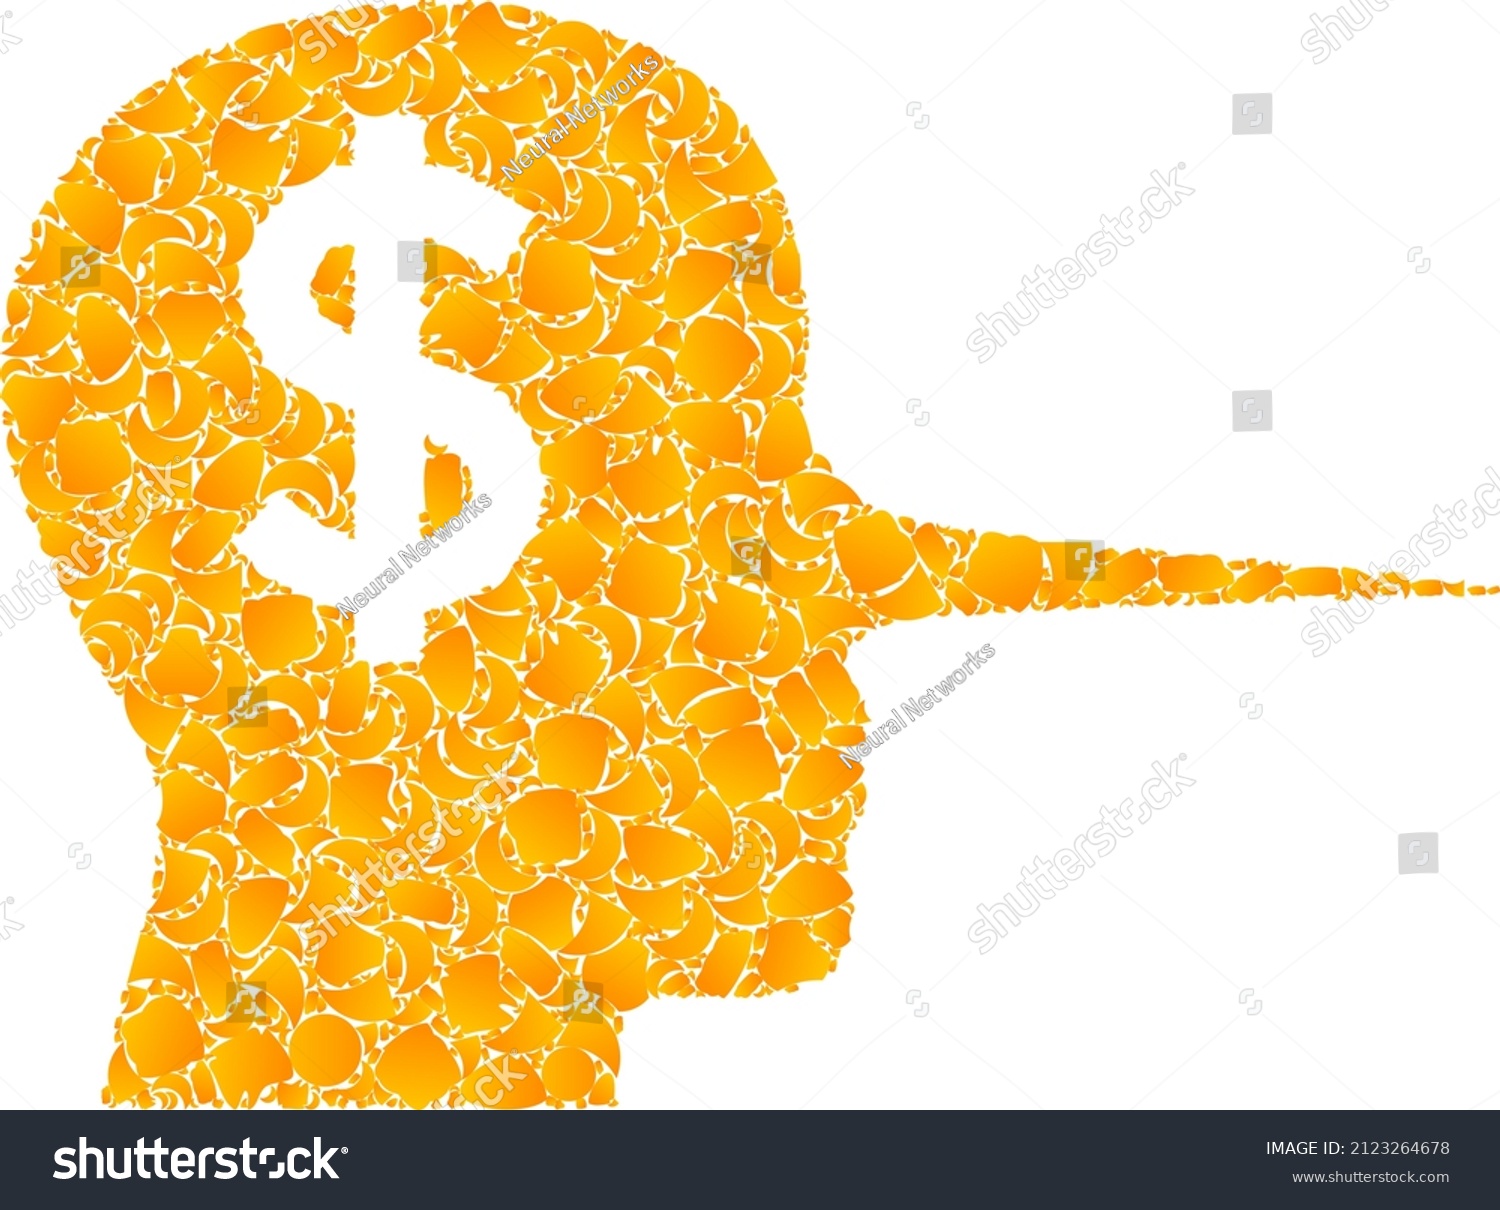 SVG of Vector gold financial liar mosaic icon. Financial liar is isolated on a white background. Gold particles mosaic based on financial liar icon. svg